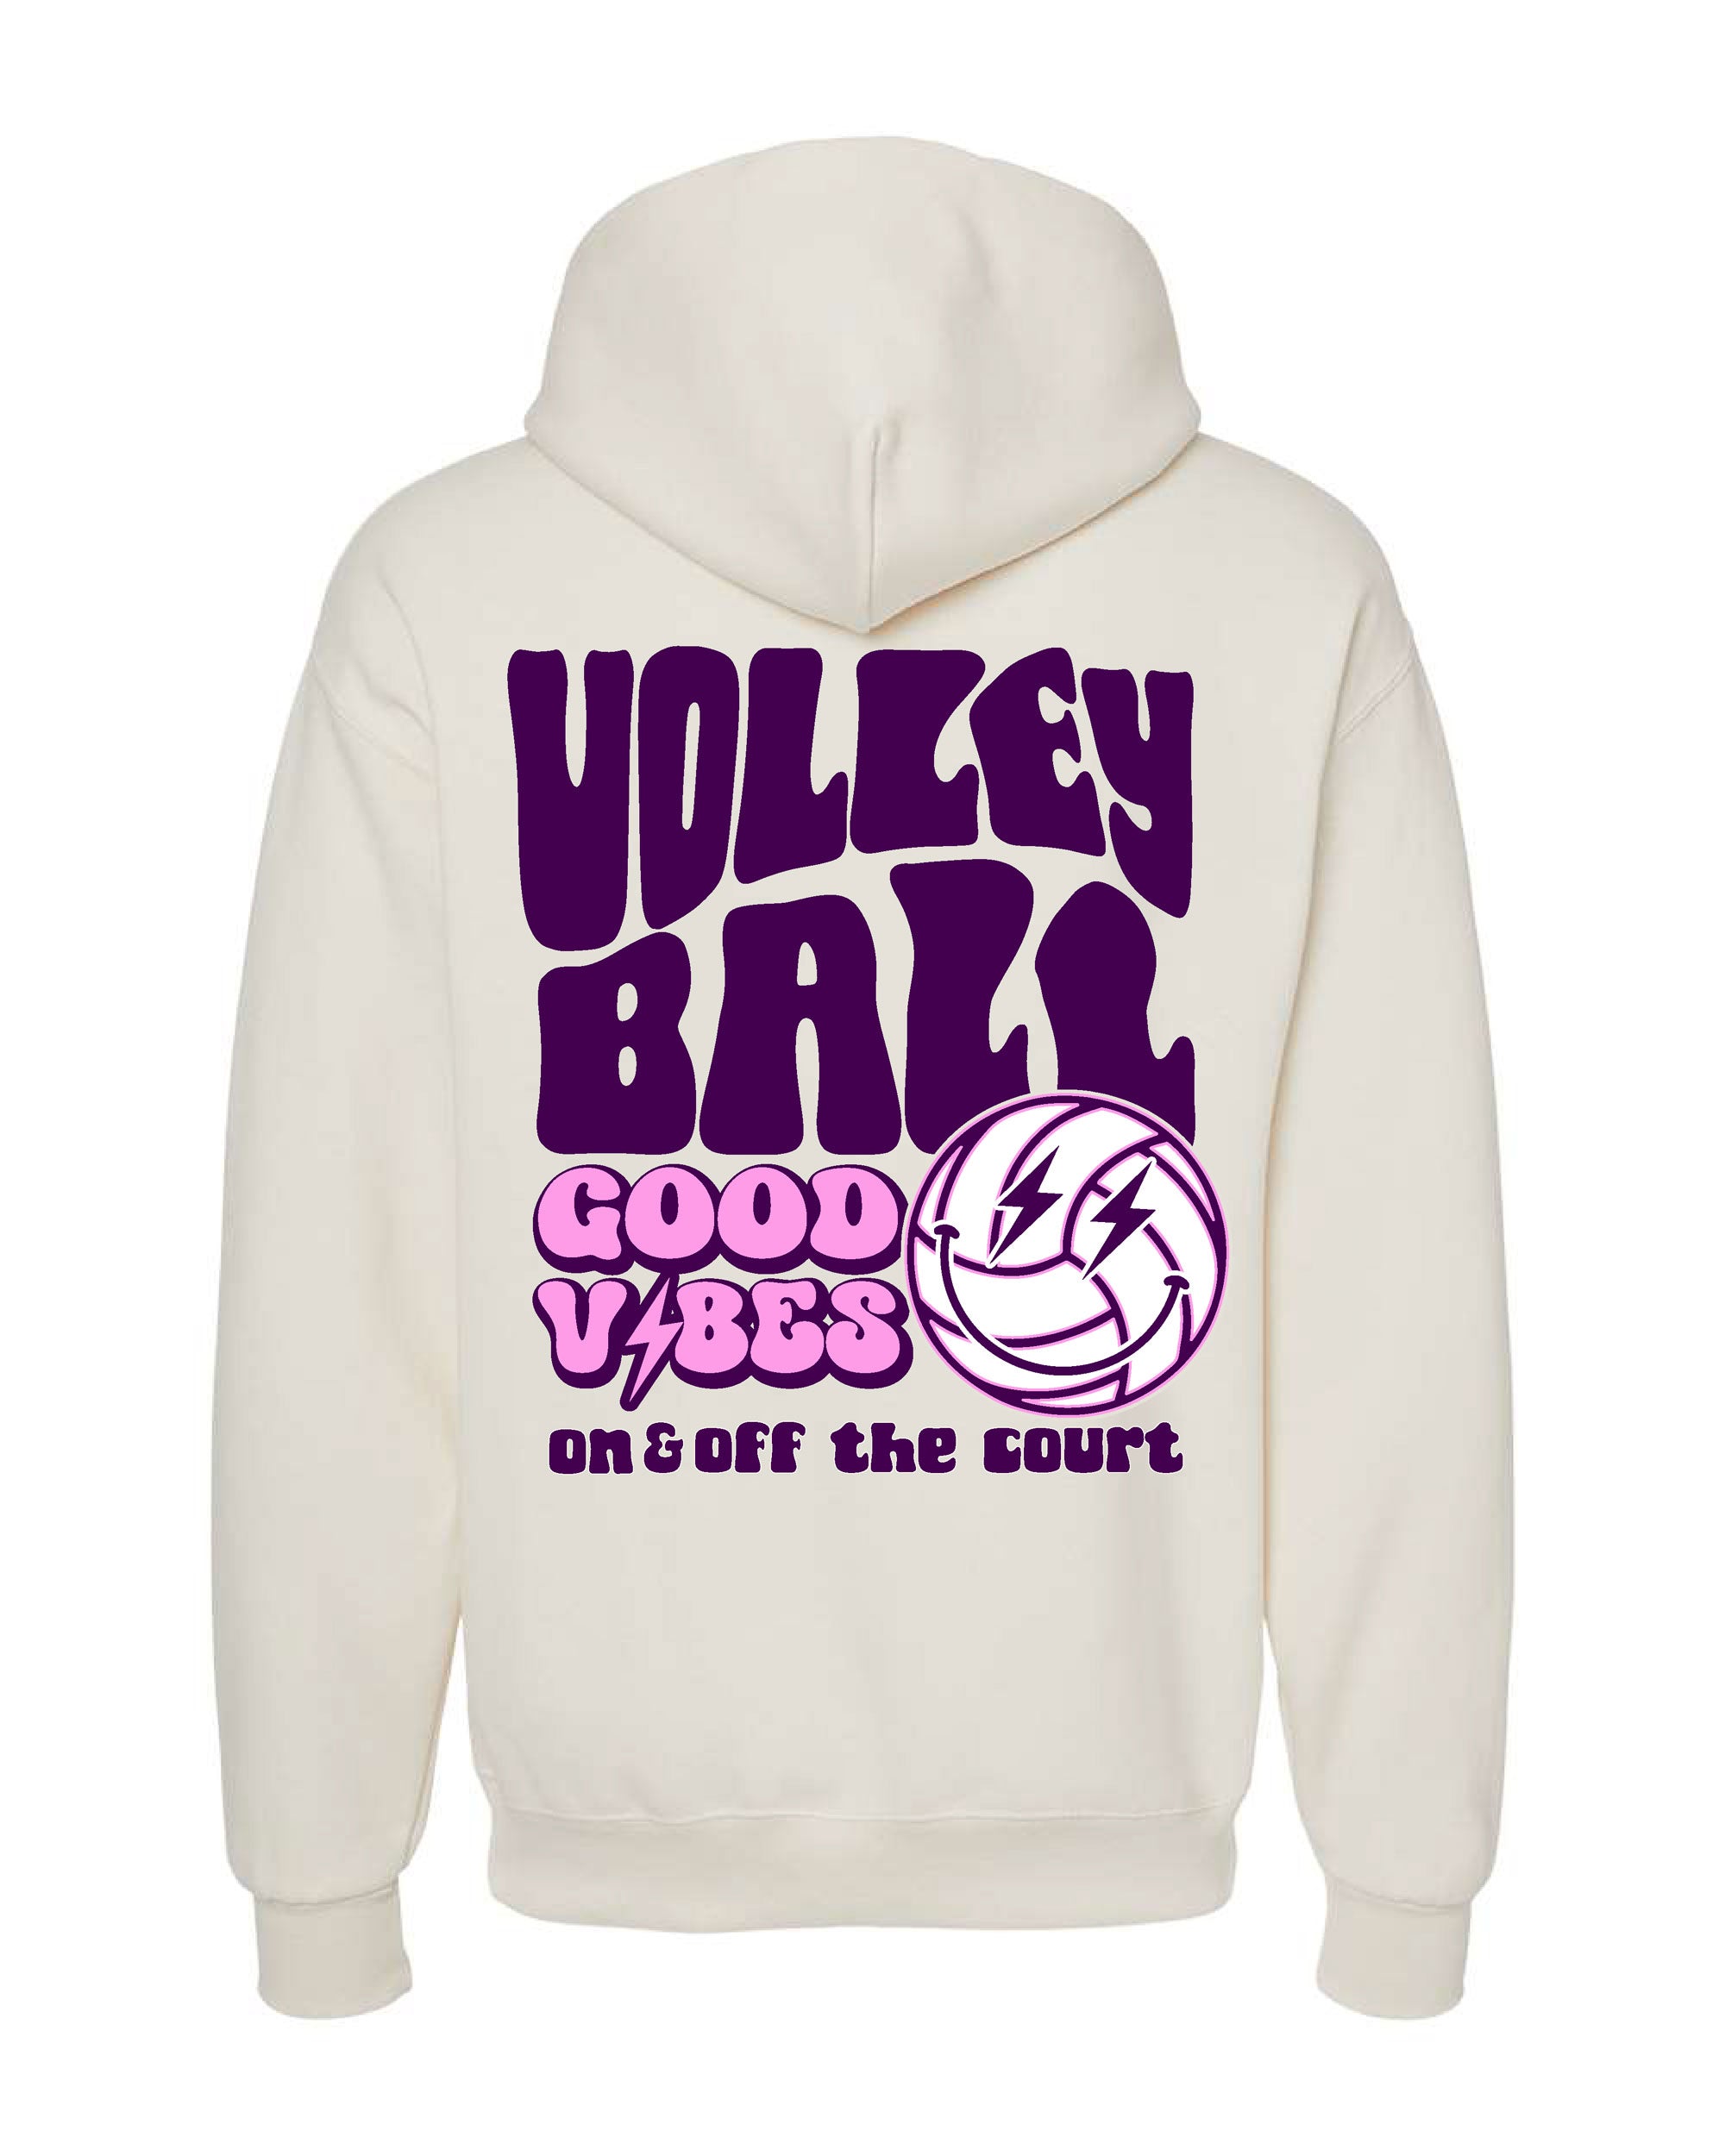 RevUp Sports: RevUp Your Style Game with the Ultimate Volleyball Vibe  Unisex Hoodie - Perfect for Sports Enthusiasts! S at  Men's Clothing  store